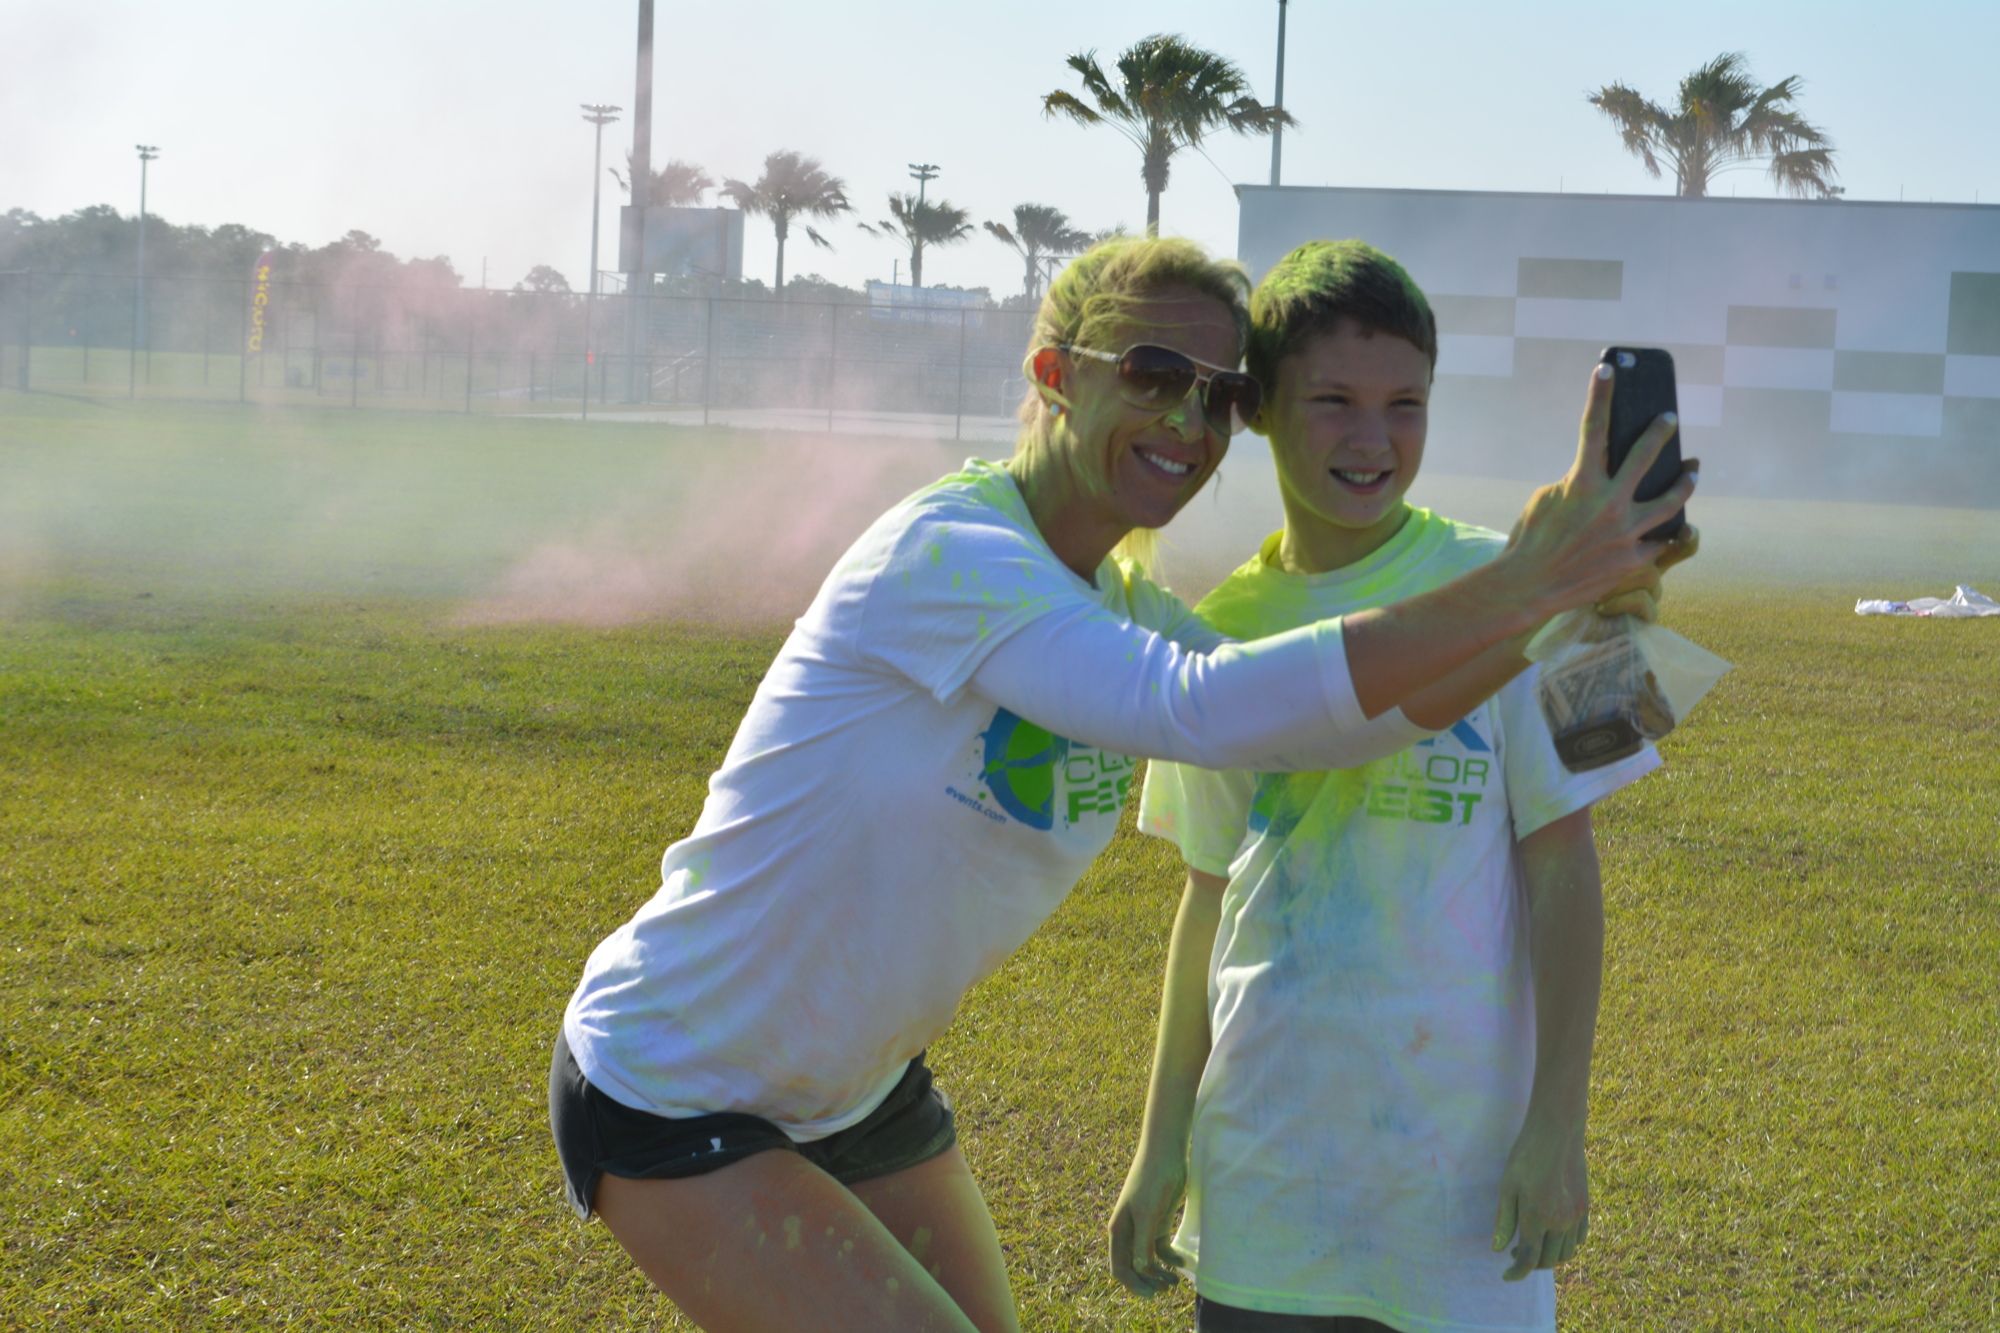 Lakewood Ranch's Stephanie Heald and her son, Connor, 11, signed up the evening before the event. They stuck around long enough Saturday morning to paint themselves with colored chalk and take a selfie.